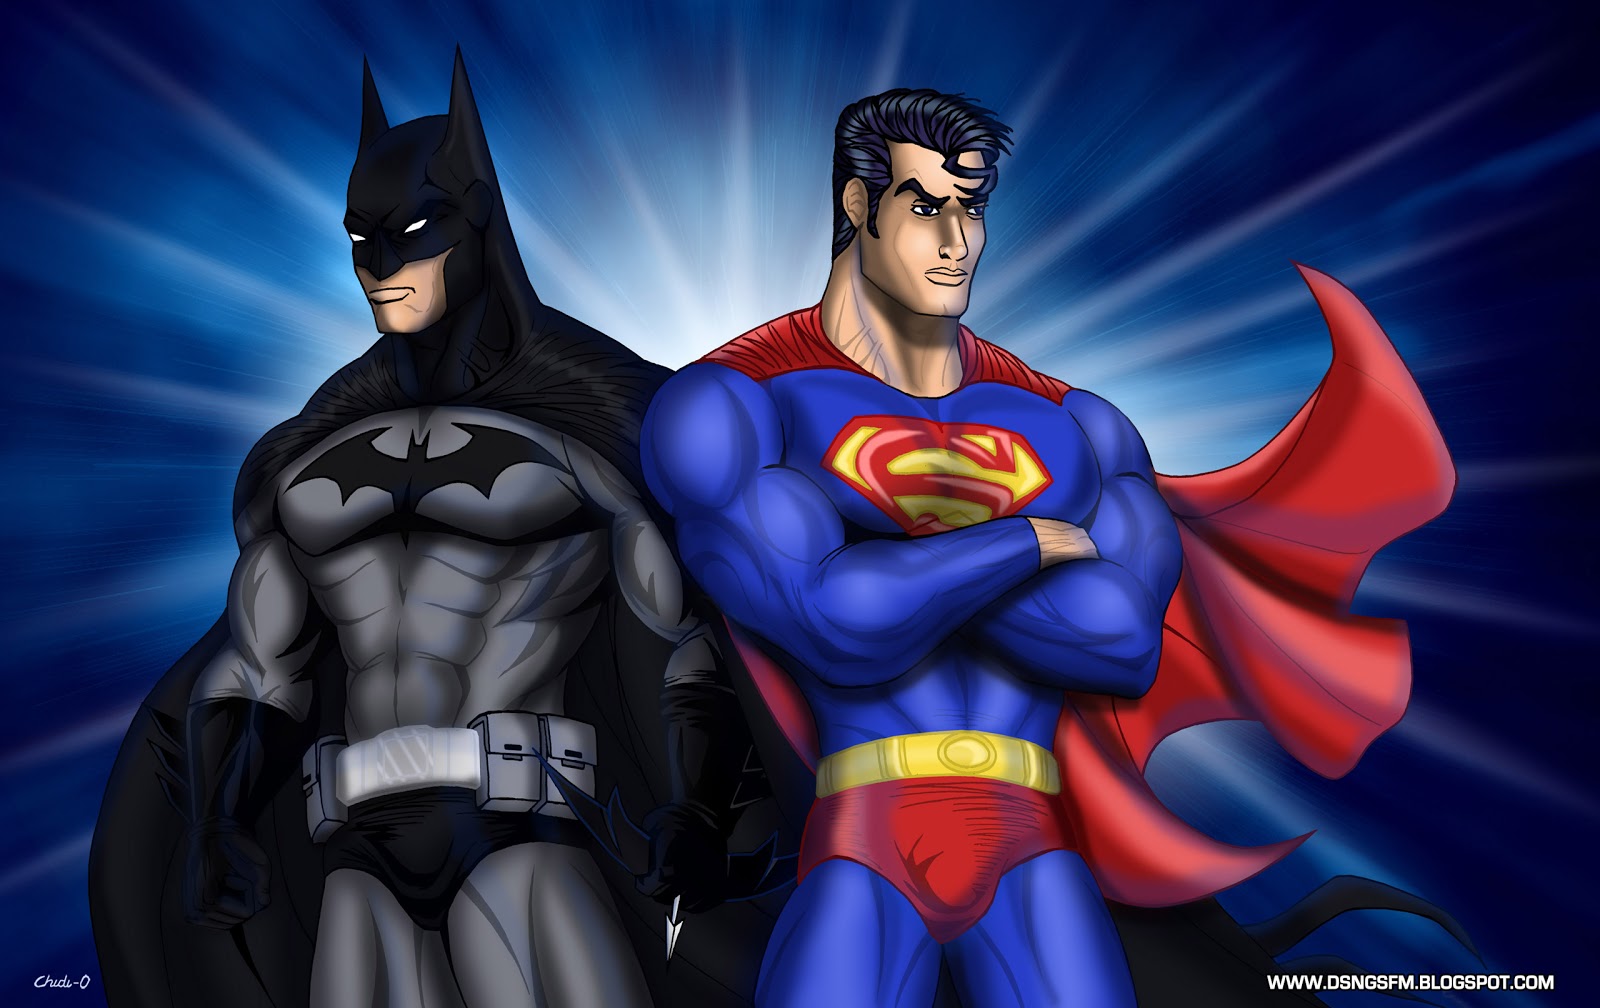 Free Download Dsngs Sci Fi Megaverse Superman Batman Posters Plus New Art By 1600x1008 For